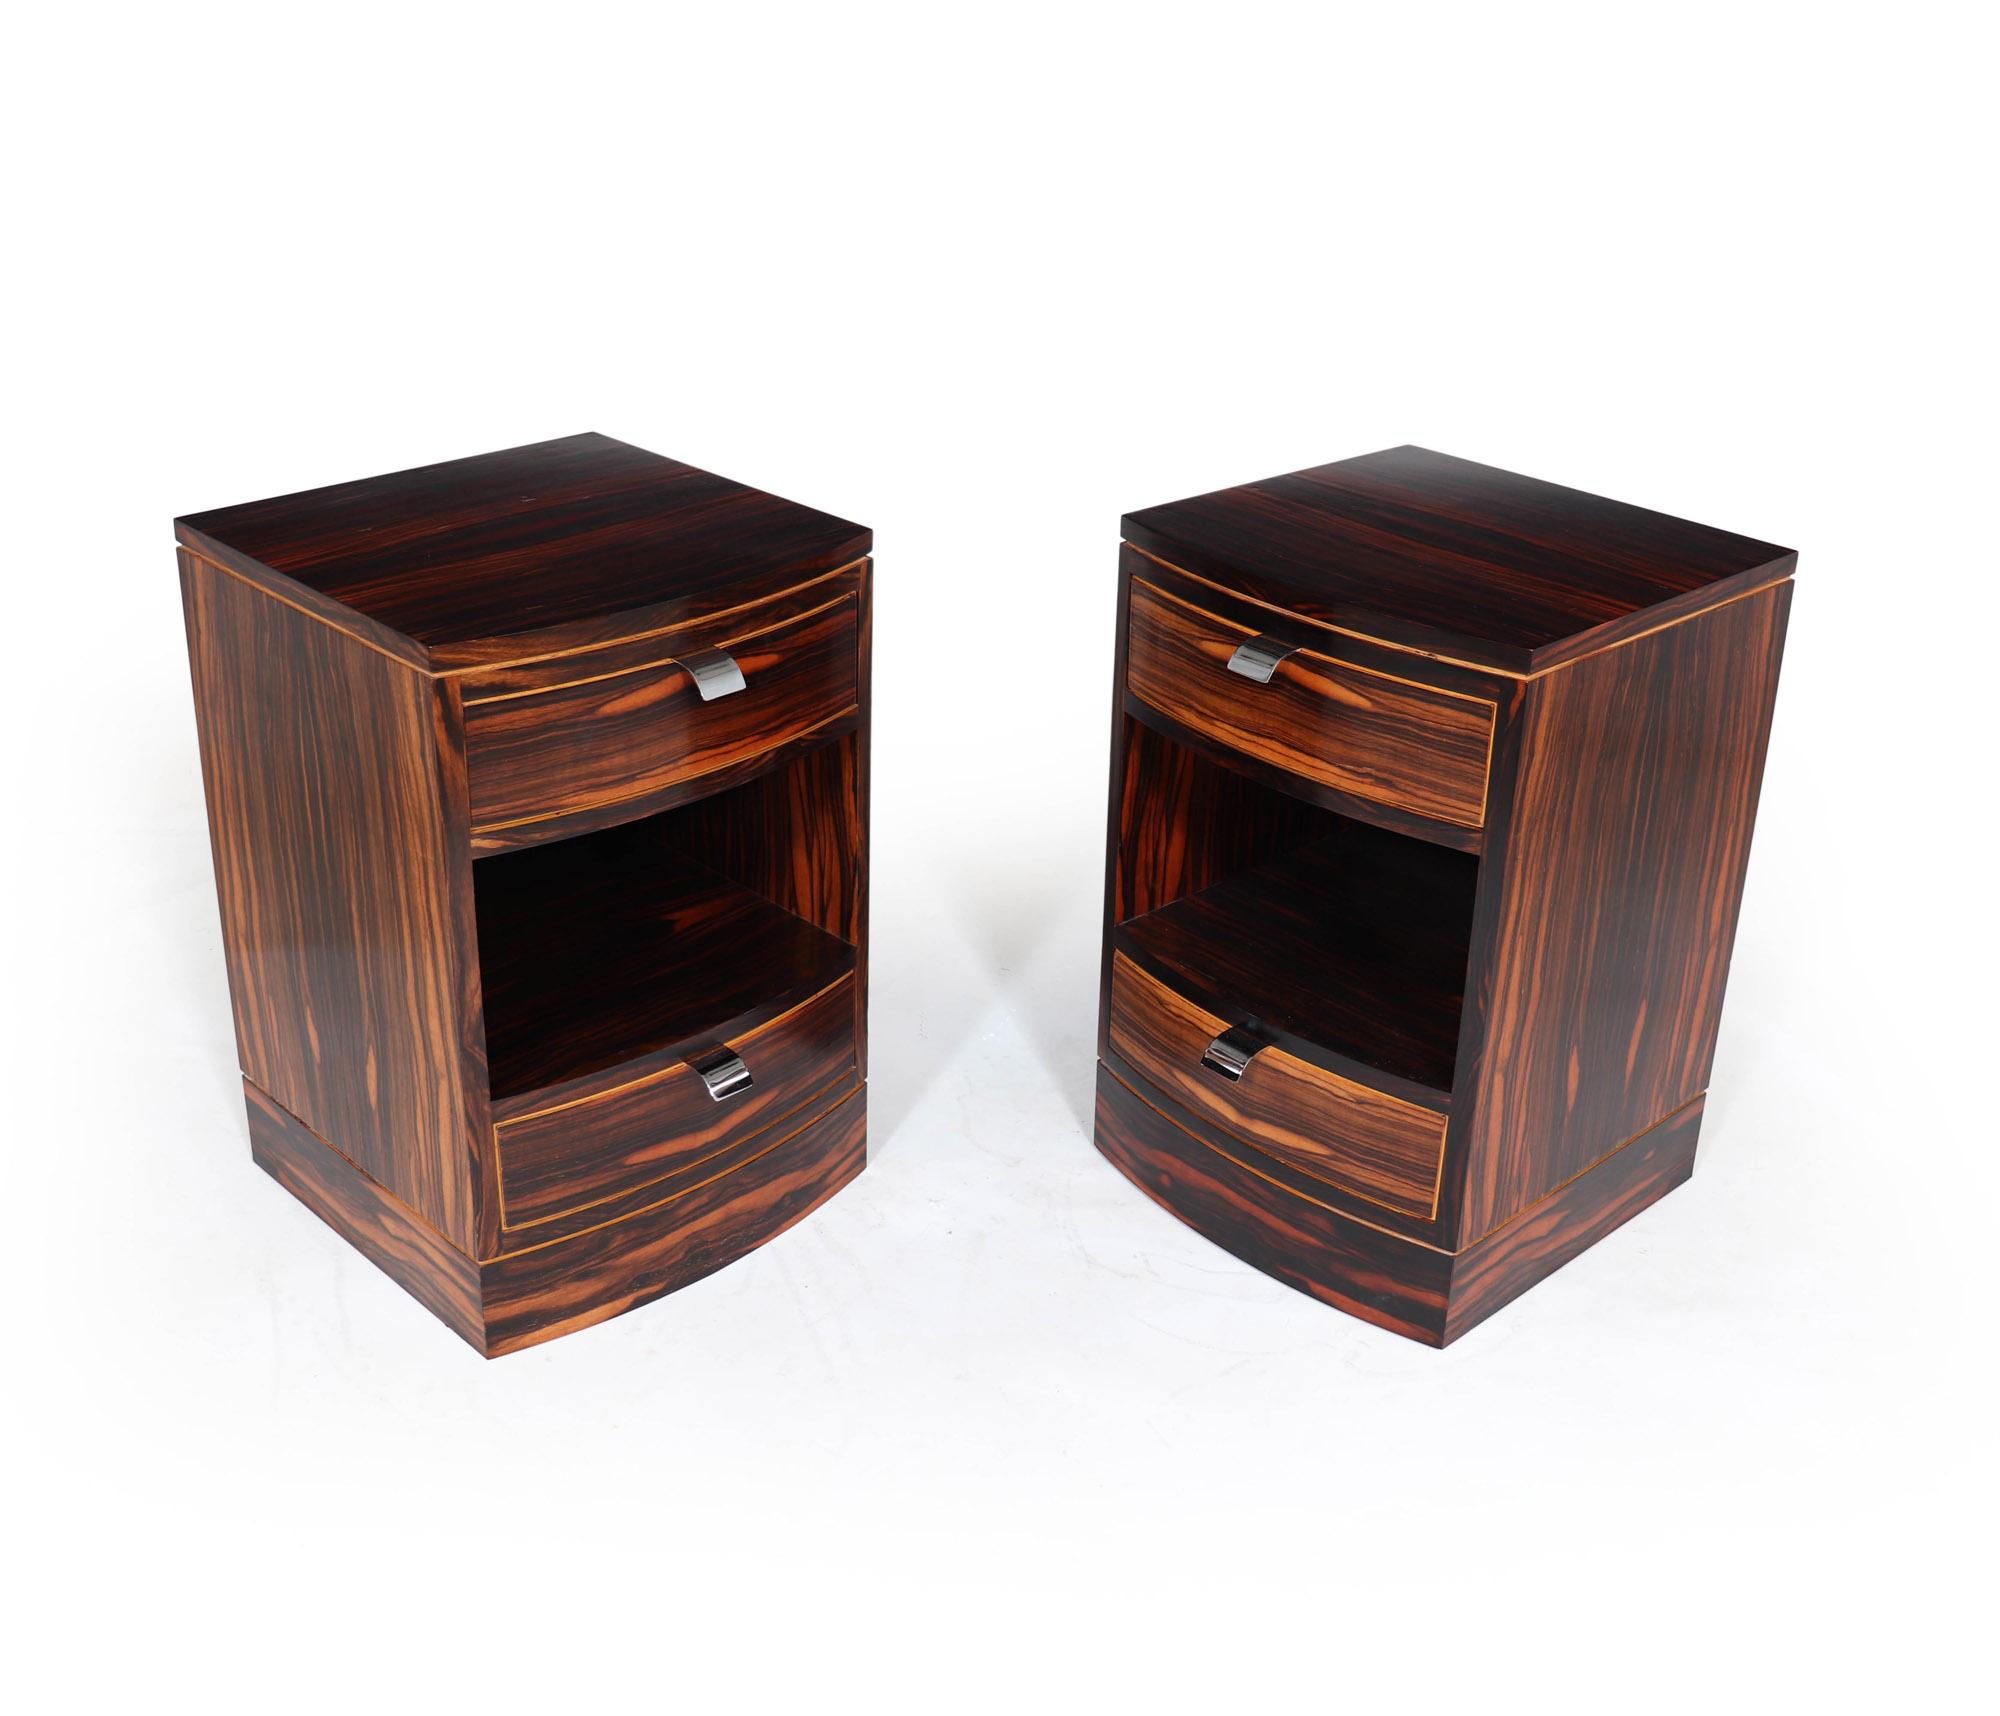 A great quality pair of bedside tables made in the Art Deco manner having bowed fronts and boxwood detail, the chests have two sliding drawers with chrome pull handles, beautifully made but unfortunately not that old the chests have been restored